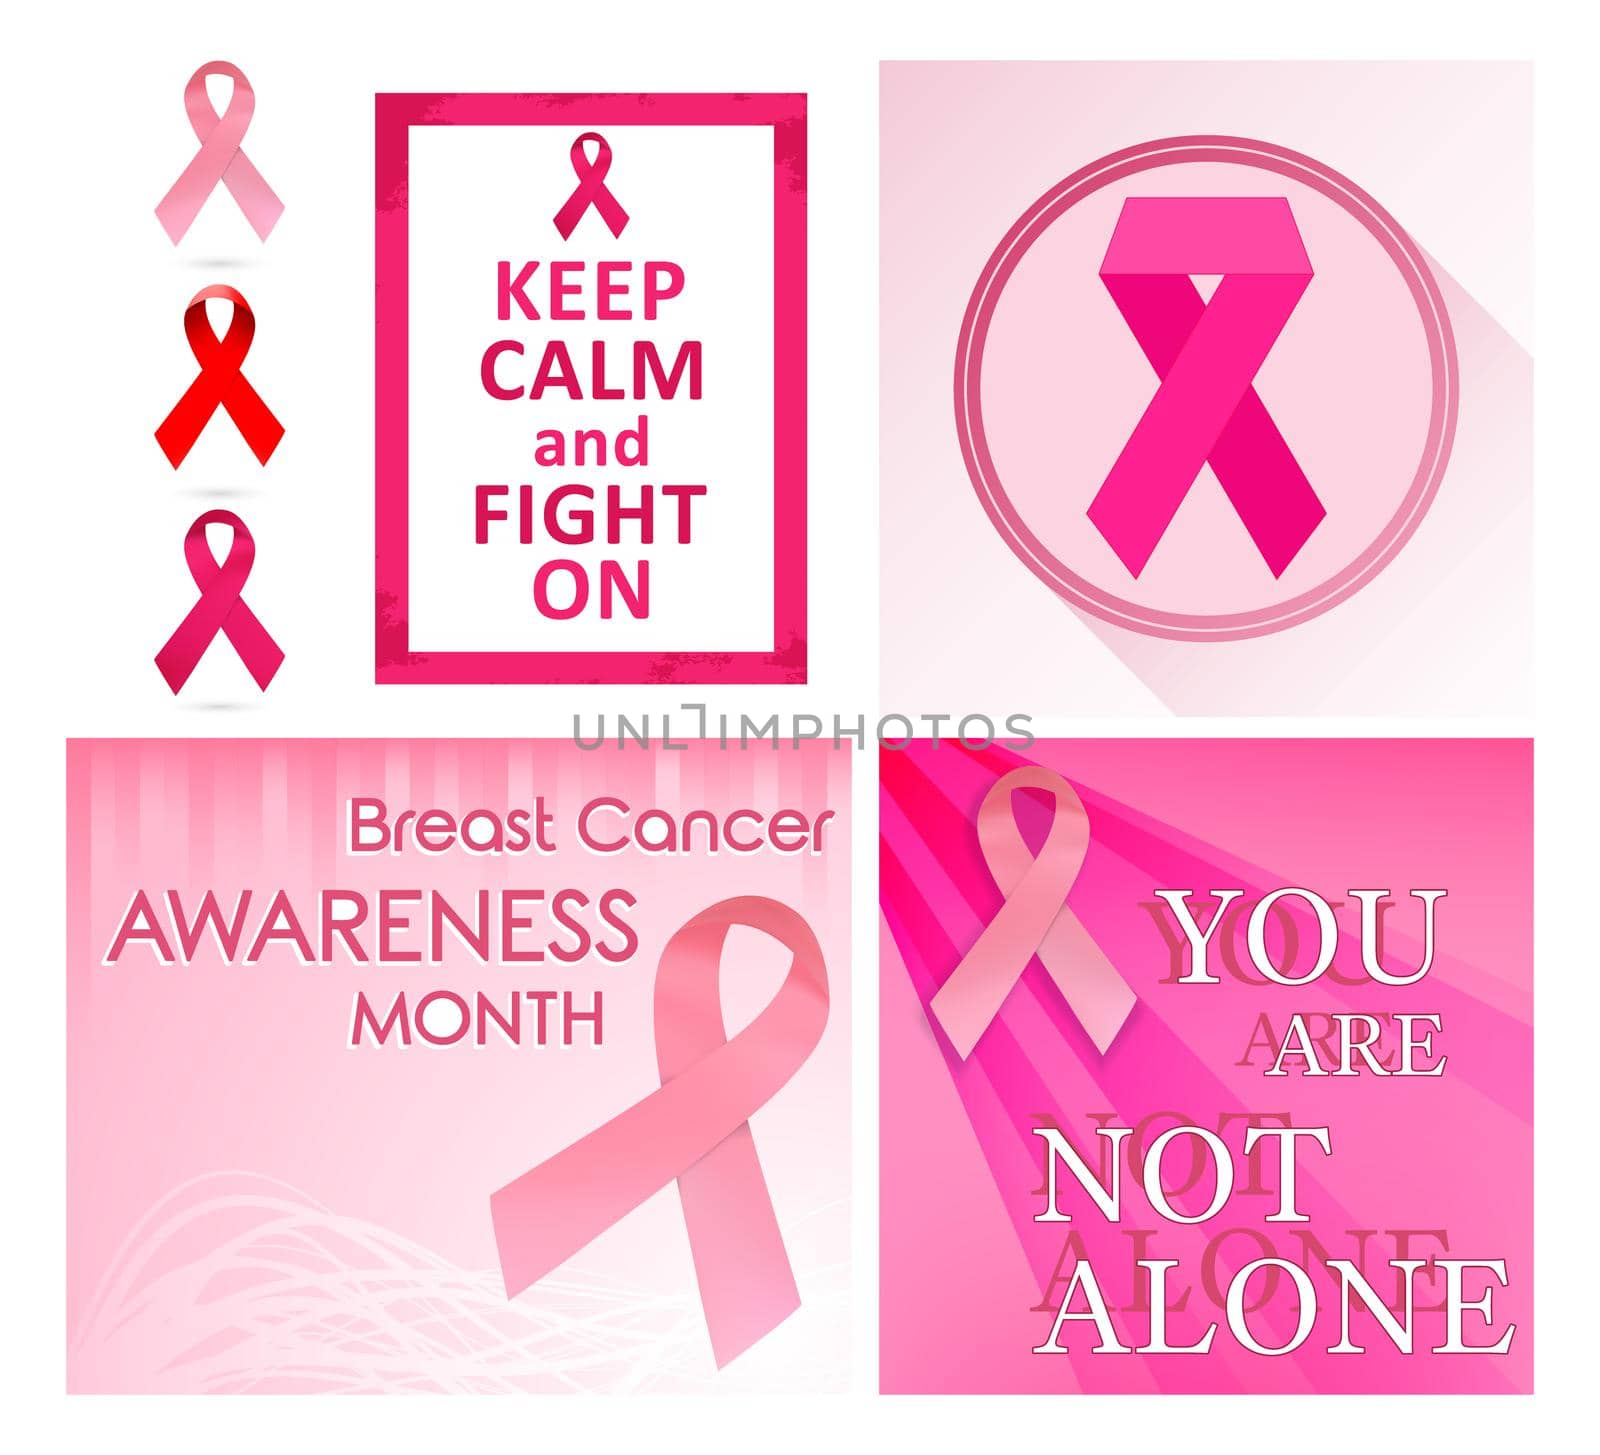 Breast cancer awareness month posters and pink ribbons. Vector illustration.